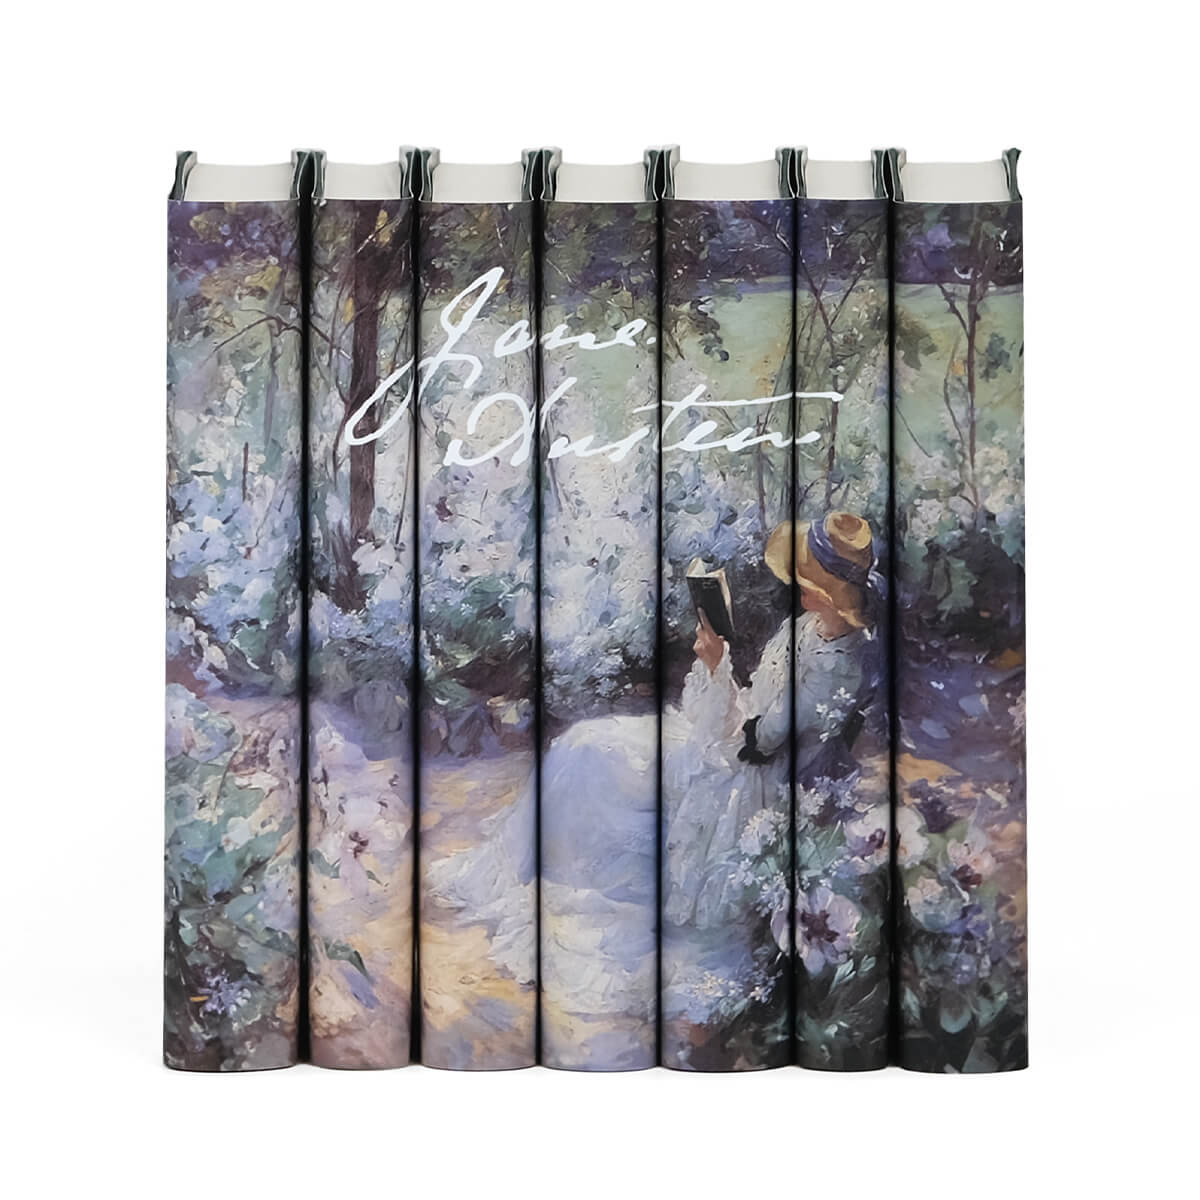 Jane Austen Book Set from Juniper Custom. Dust jackets featuring a Frank Bramley painting of a women reading in a garden across the spines and Jane Austen signature in white.